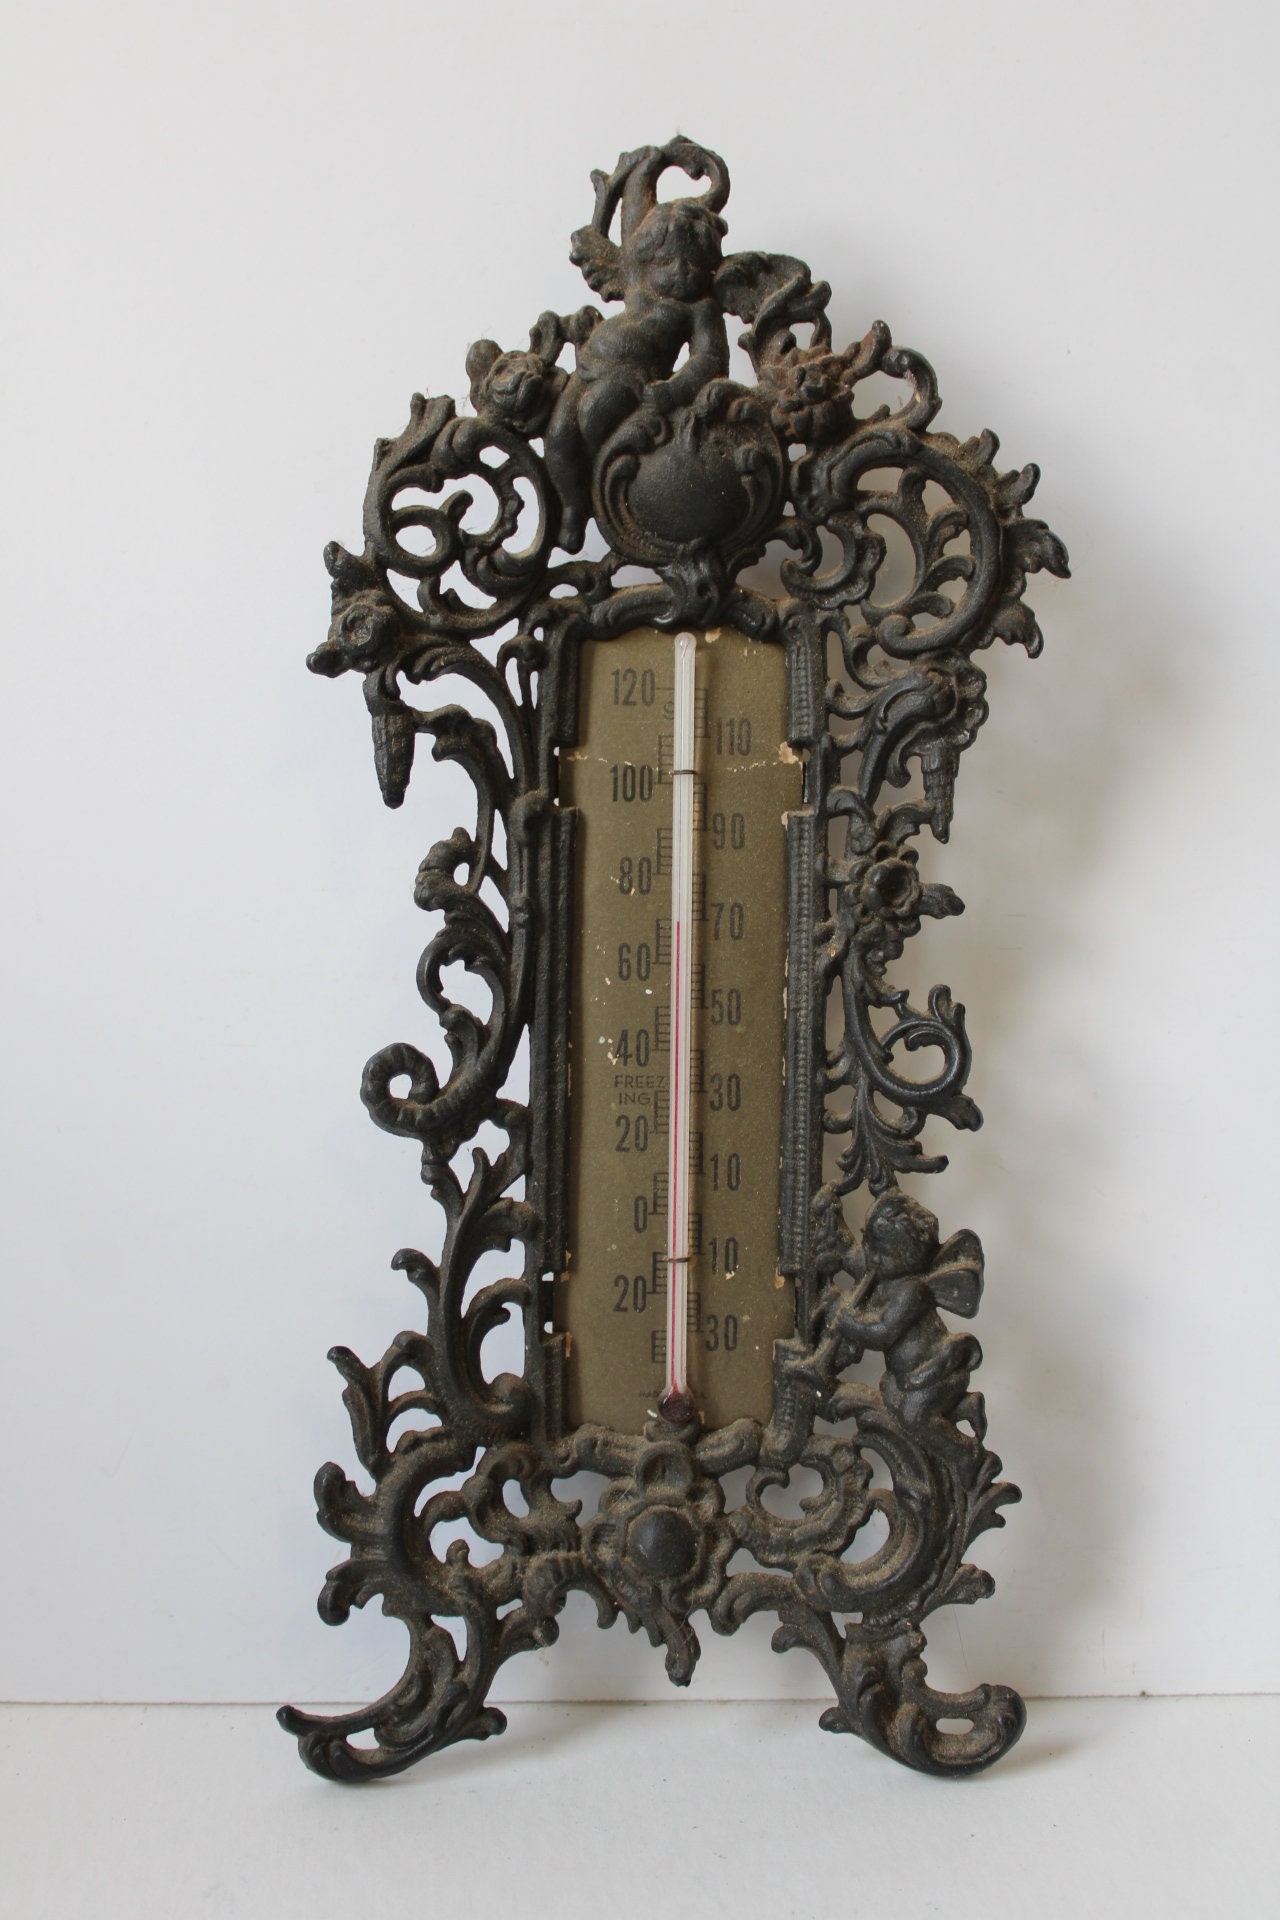 Cast Iron and Glass Outdoor Thermometer